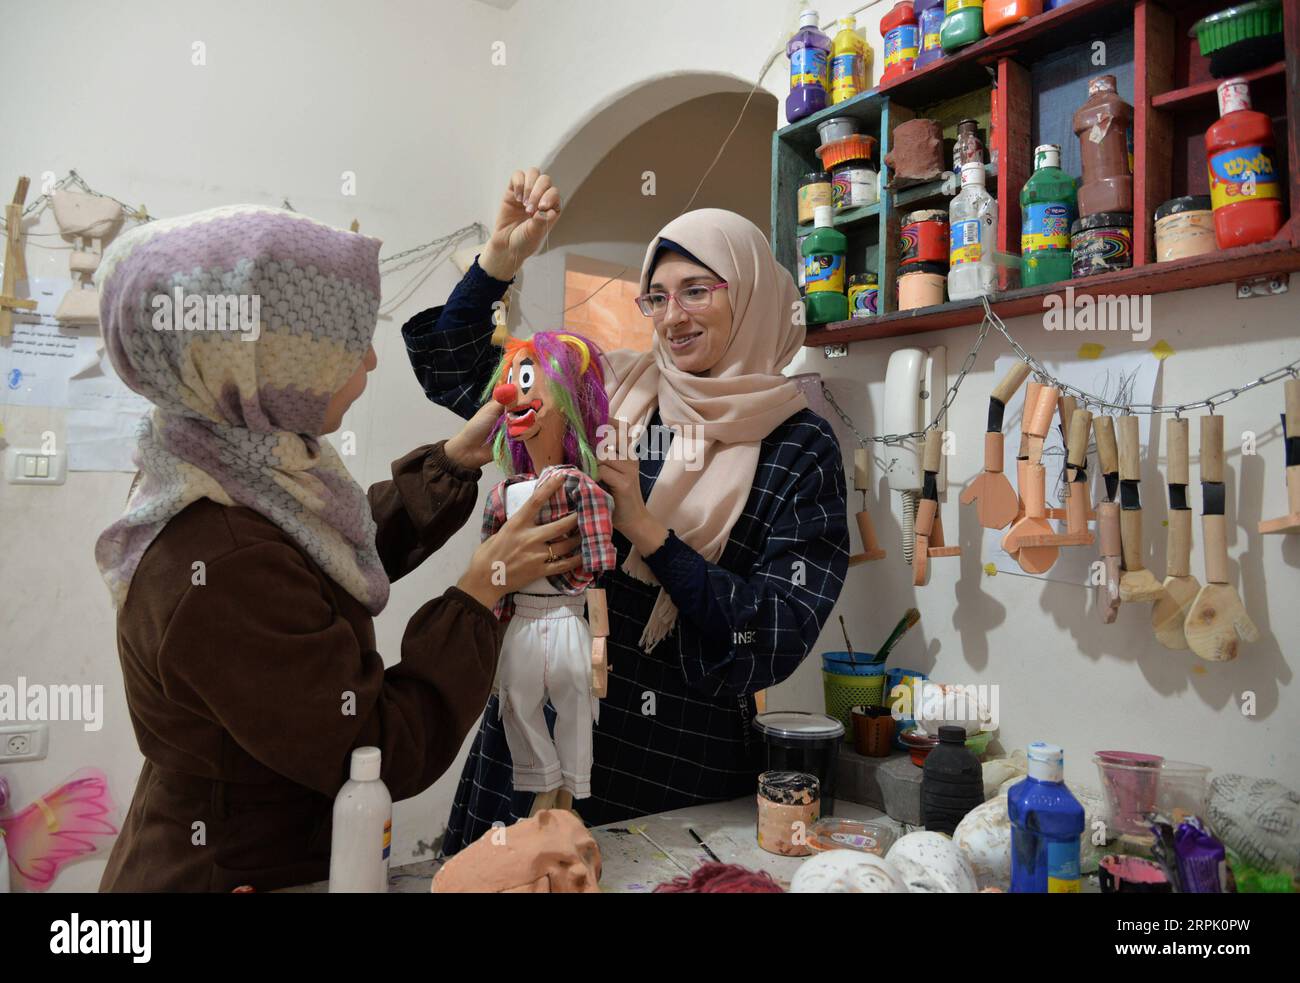 191223 -- GAZA, Dec. 23, 2019 Xinhua -- Two Palestinian girls work on a marionette at Mahdi Karira s office in Gaza City, on Dec. 23, 2019. Mahdi Karira, a 39-year-old master at making the marionette, spent 6 months on training a group of 8 girls and 2 young men to make puppets and perform puppet theater shows for children, in an attempt to promote the art of puppet theater in the Gaza Strip. Photo by Rizek Abdeljawad/Xinhua MIDEAST-GAZA-ARTIST-PUPPET THEATER PUBLICATIONxNOTxINxCHN Stock Photo